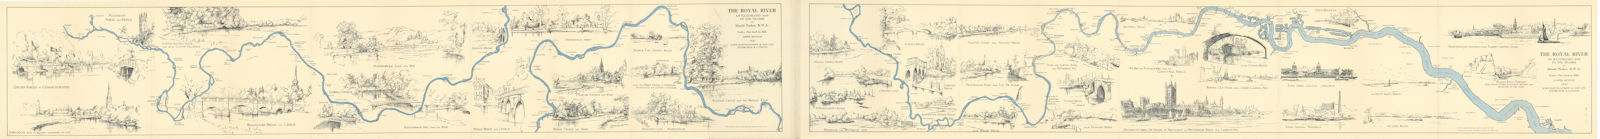 The Royal River - An illustrated map of the Thames by Maude Parker 220x20cm 1937